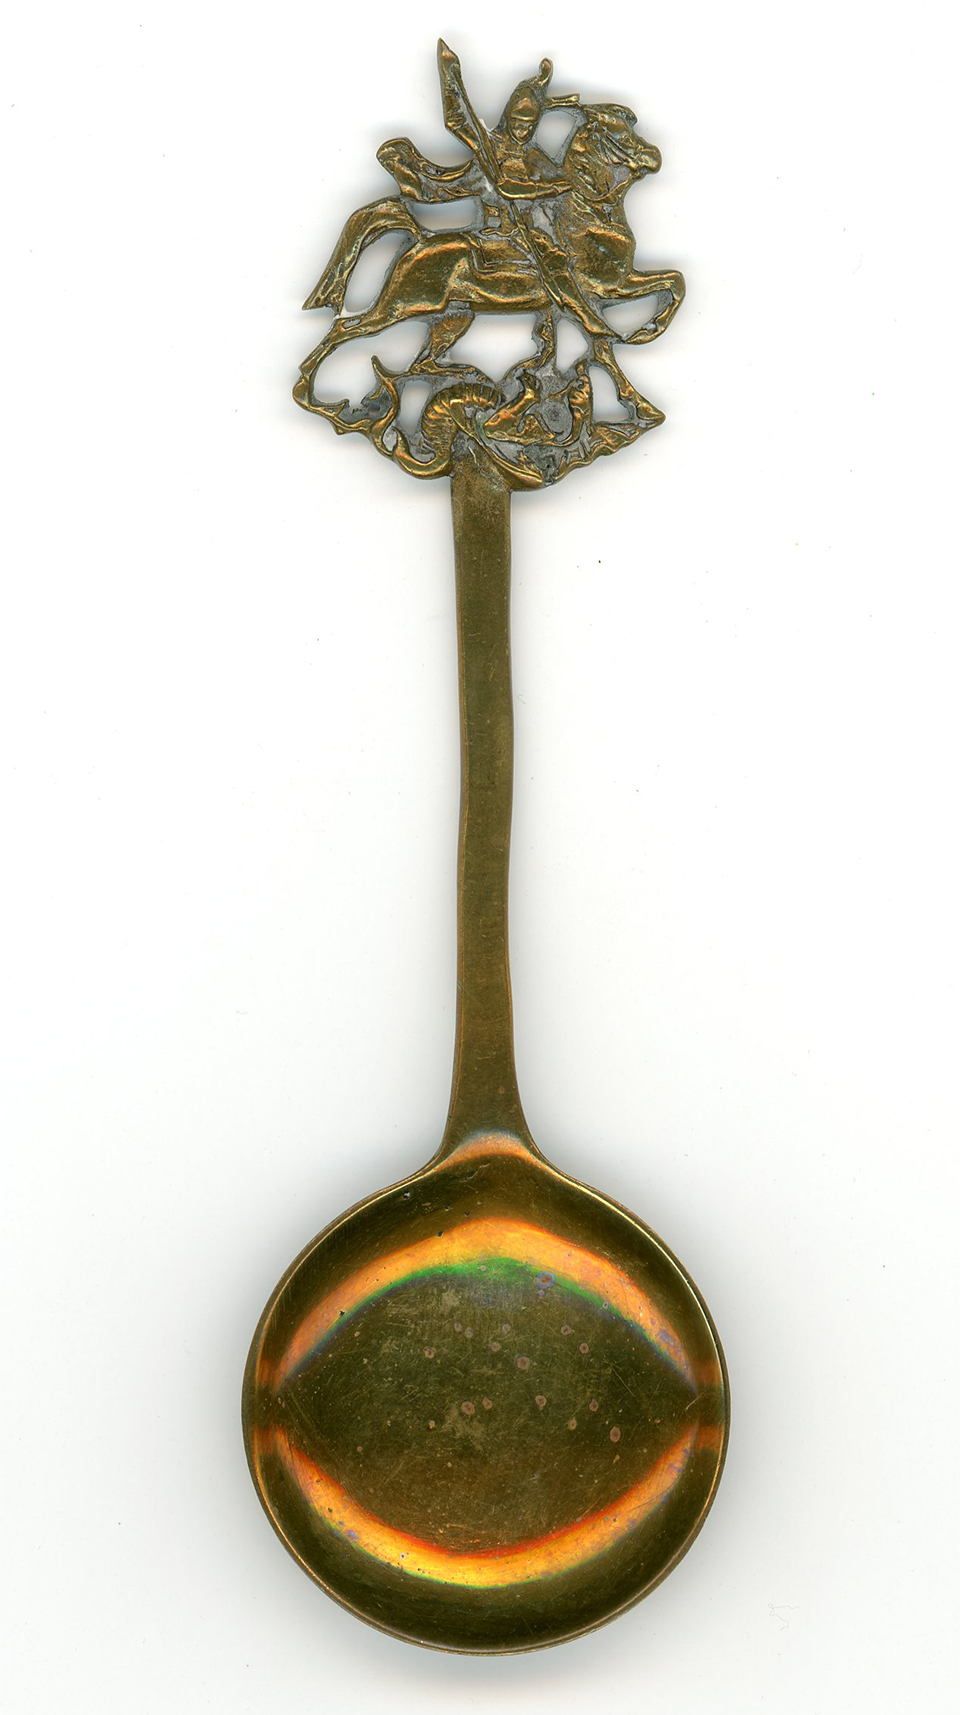 A brass spoon with circular bowl and an image of St. George slaying the dragon on the end of the handle.